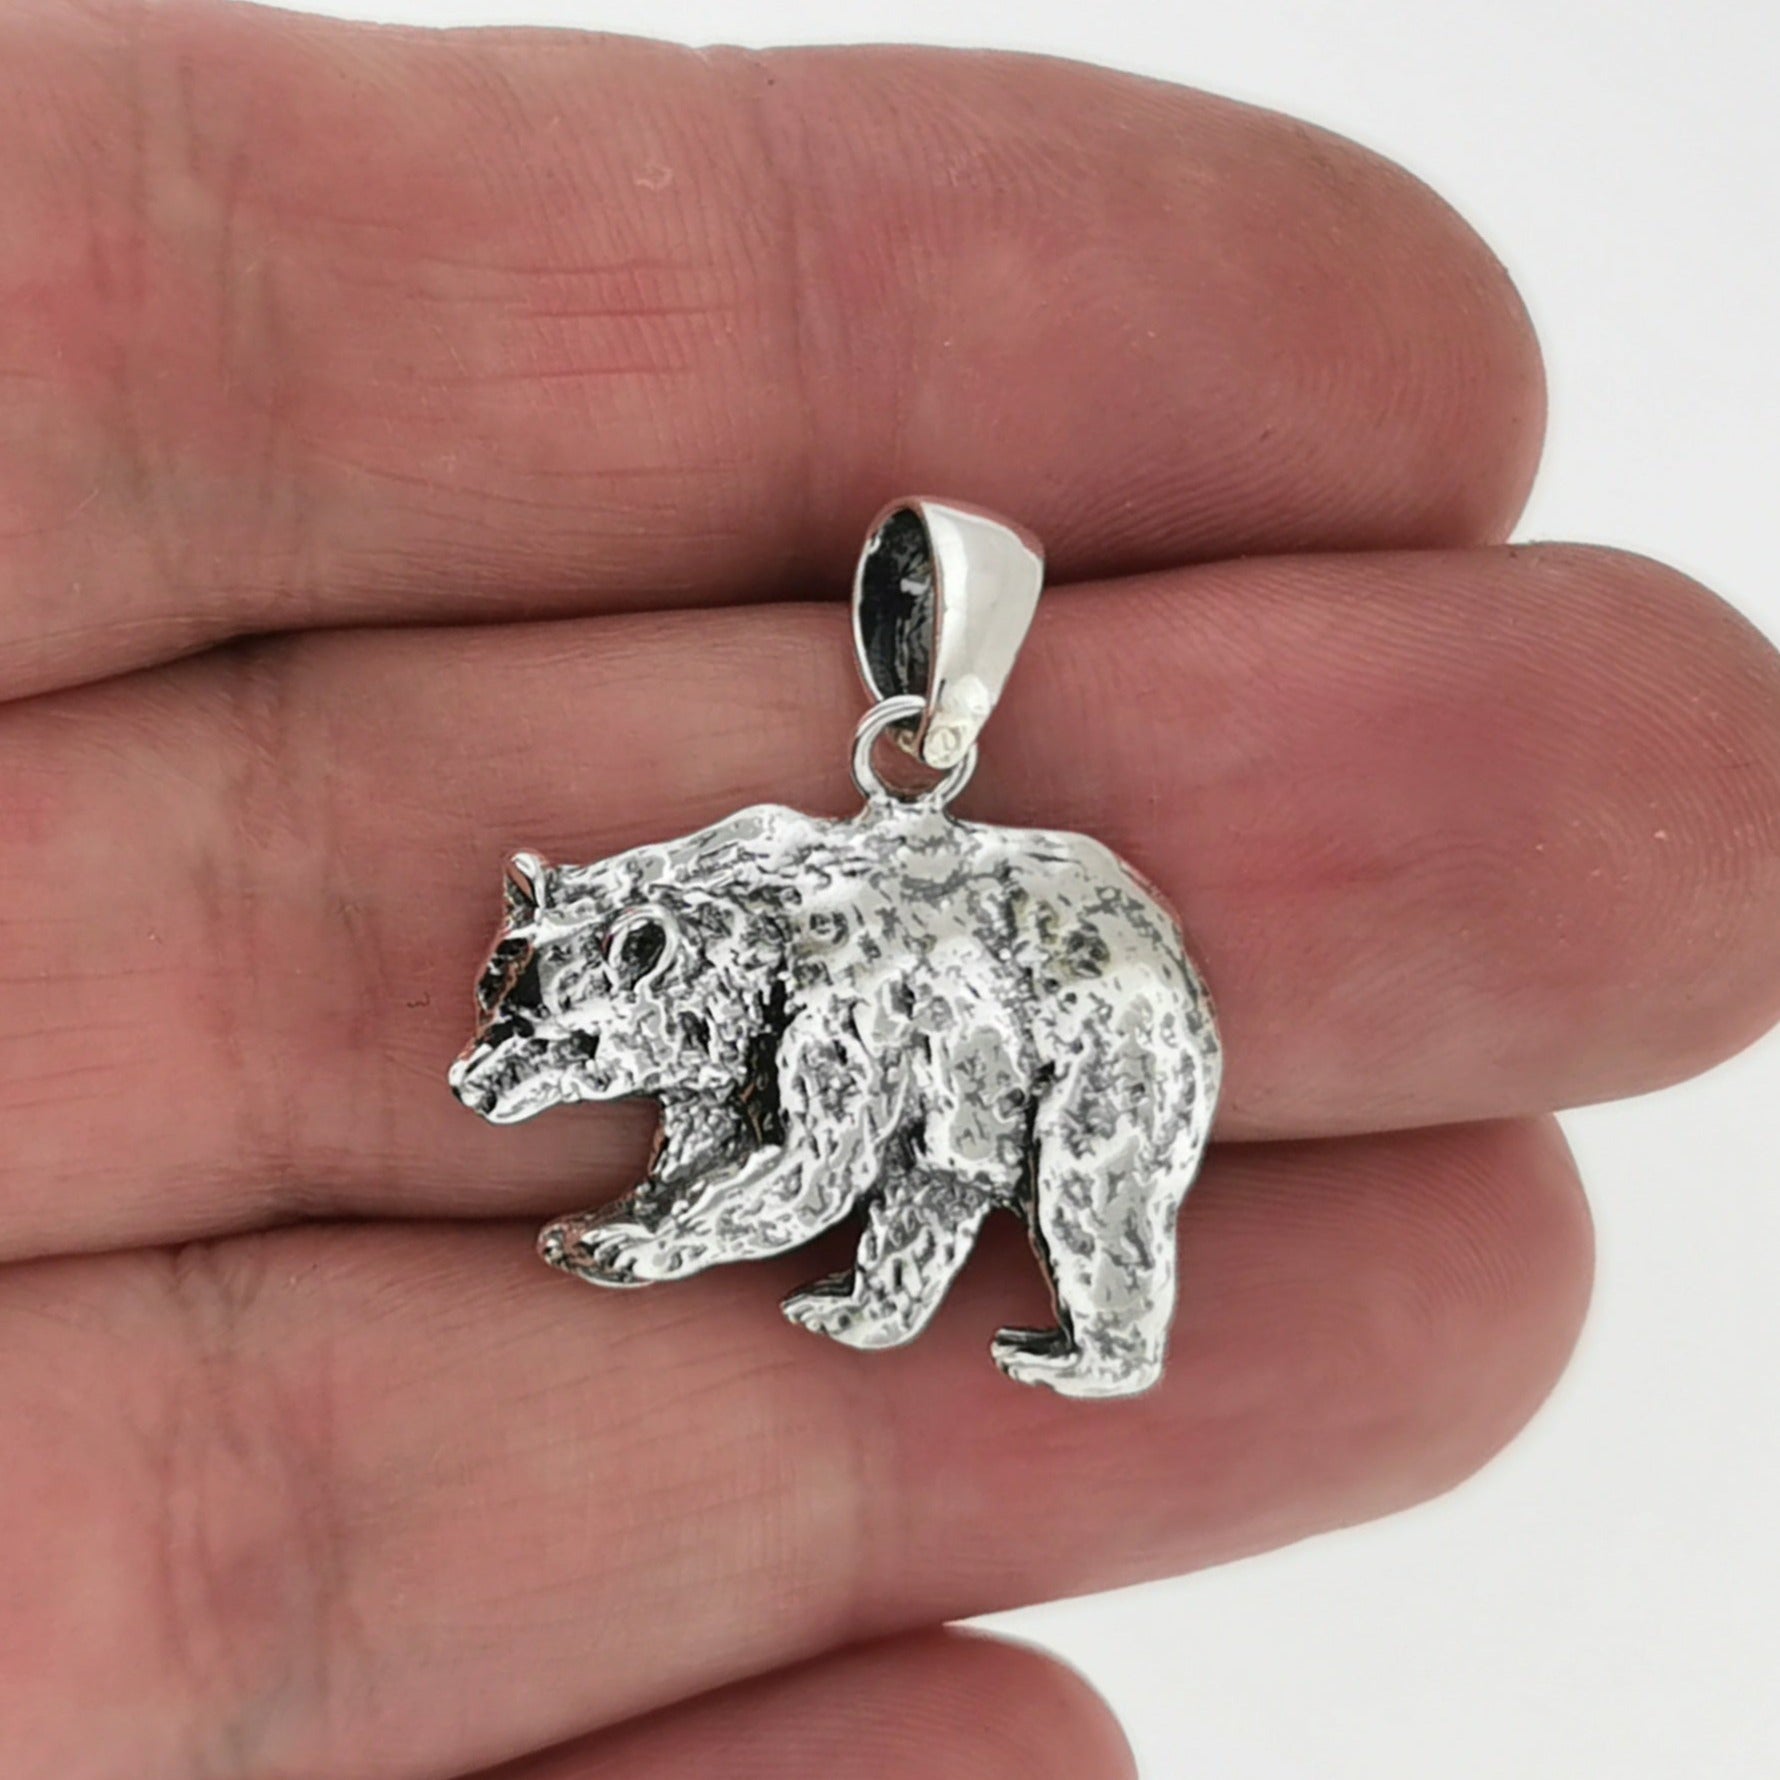 Buy Brother Bear Totem Pendant Necklace. Bear Totem of Love Necklace.  Brother Bear Totem Necklace. Animal Spirit Totem. Bear Lover Gift Necklace  Online in India - Etsy